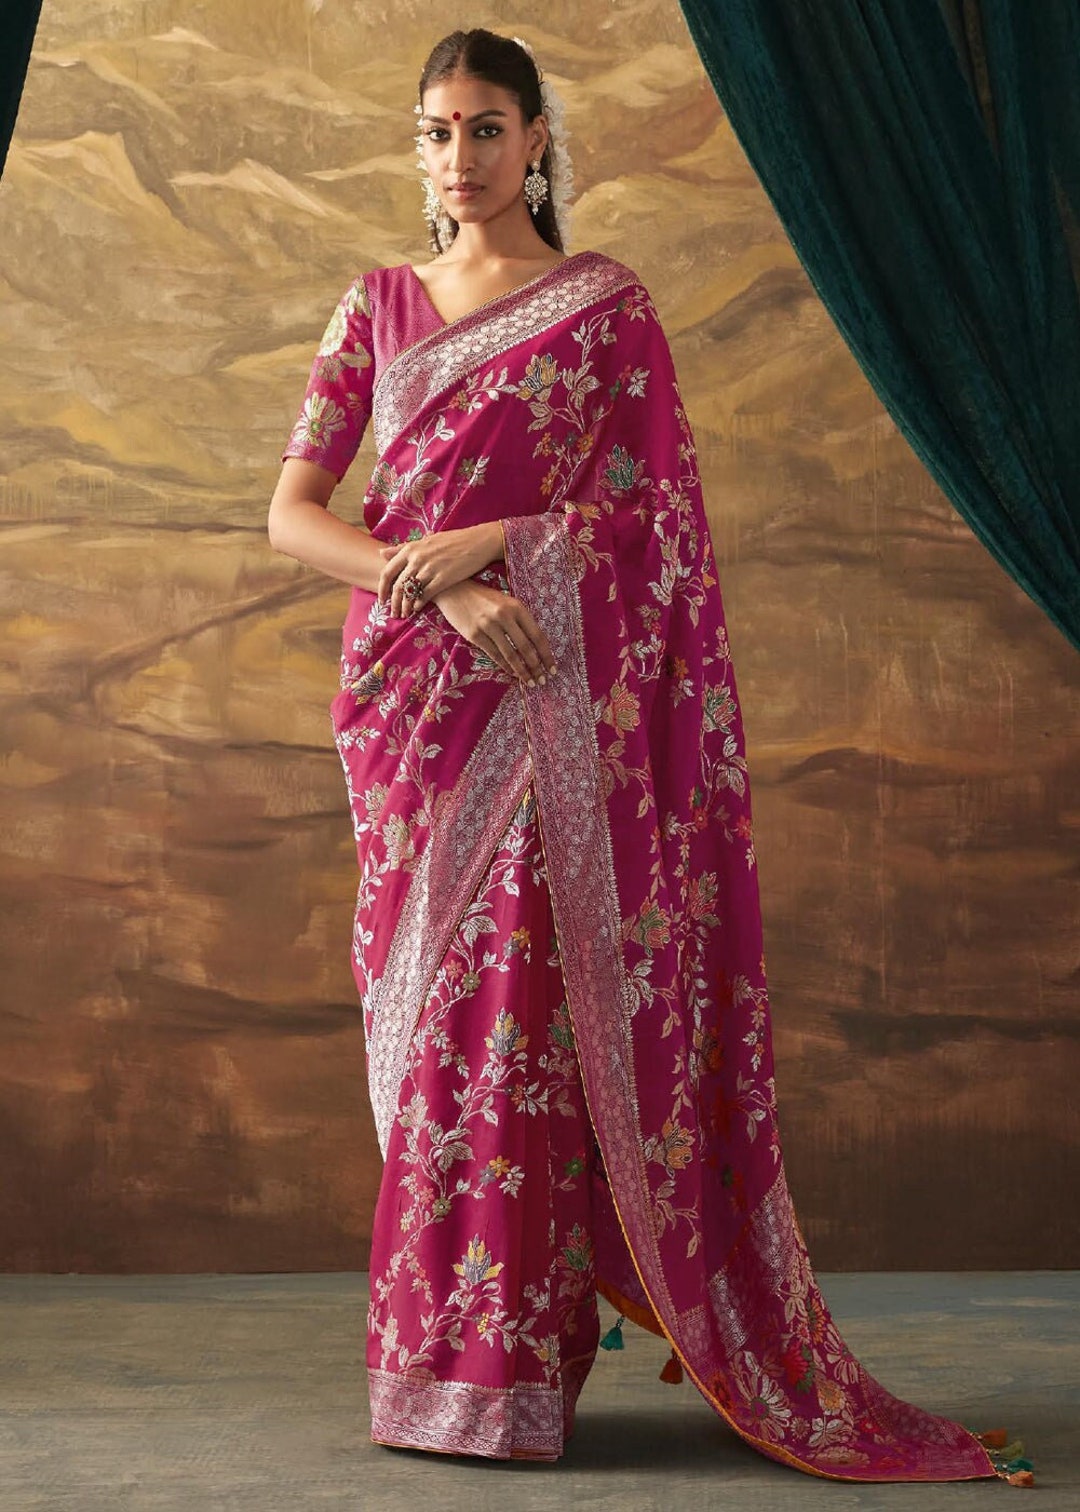 3 ELEGANT DRAPE TO LOOK MORE ATTRACTIVE AND TALL, DRAPE YOUR SAREE IN 3  DIFFERENT STYLES